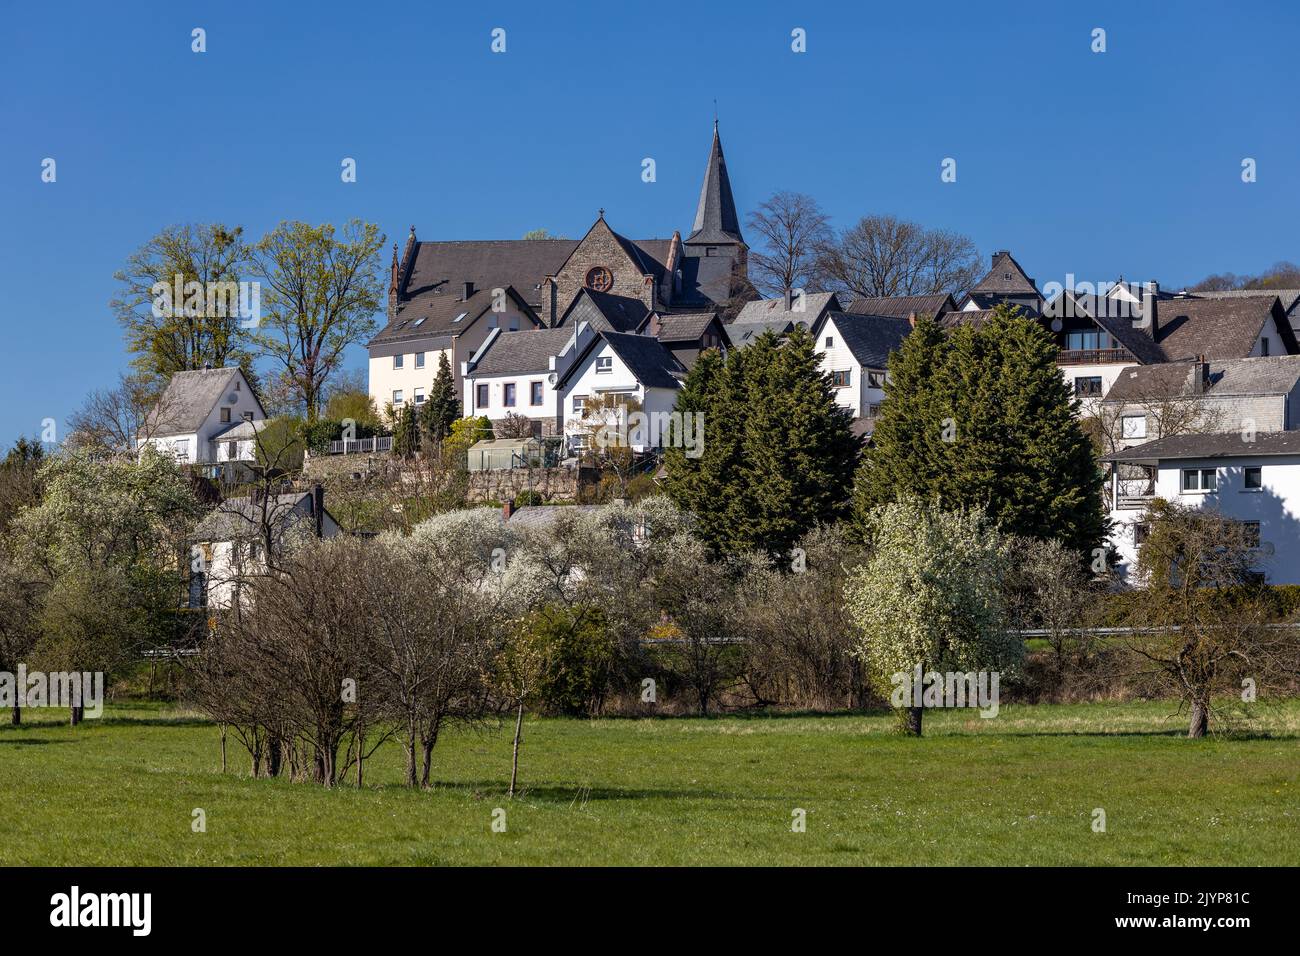 Dillheim, former village, with protestant neo-gothic Jesus Christ Church, since 1970 local district of municipality Ehringshausen, Hesse, Germany Stock Photo